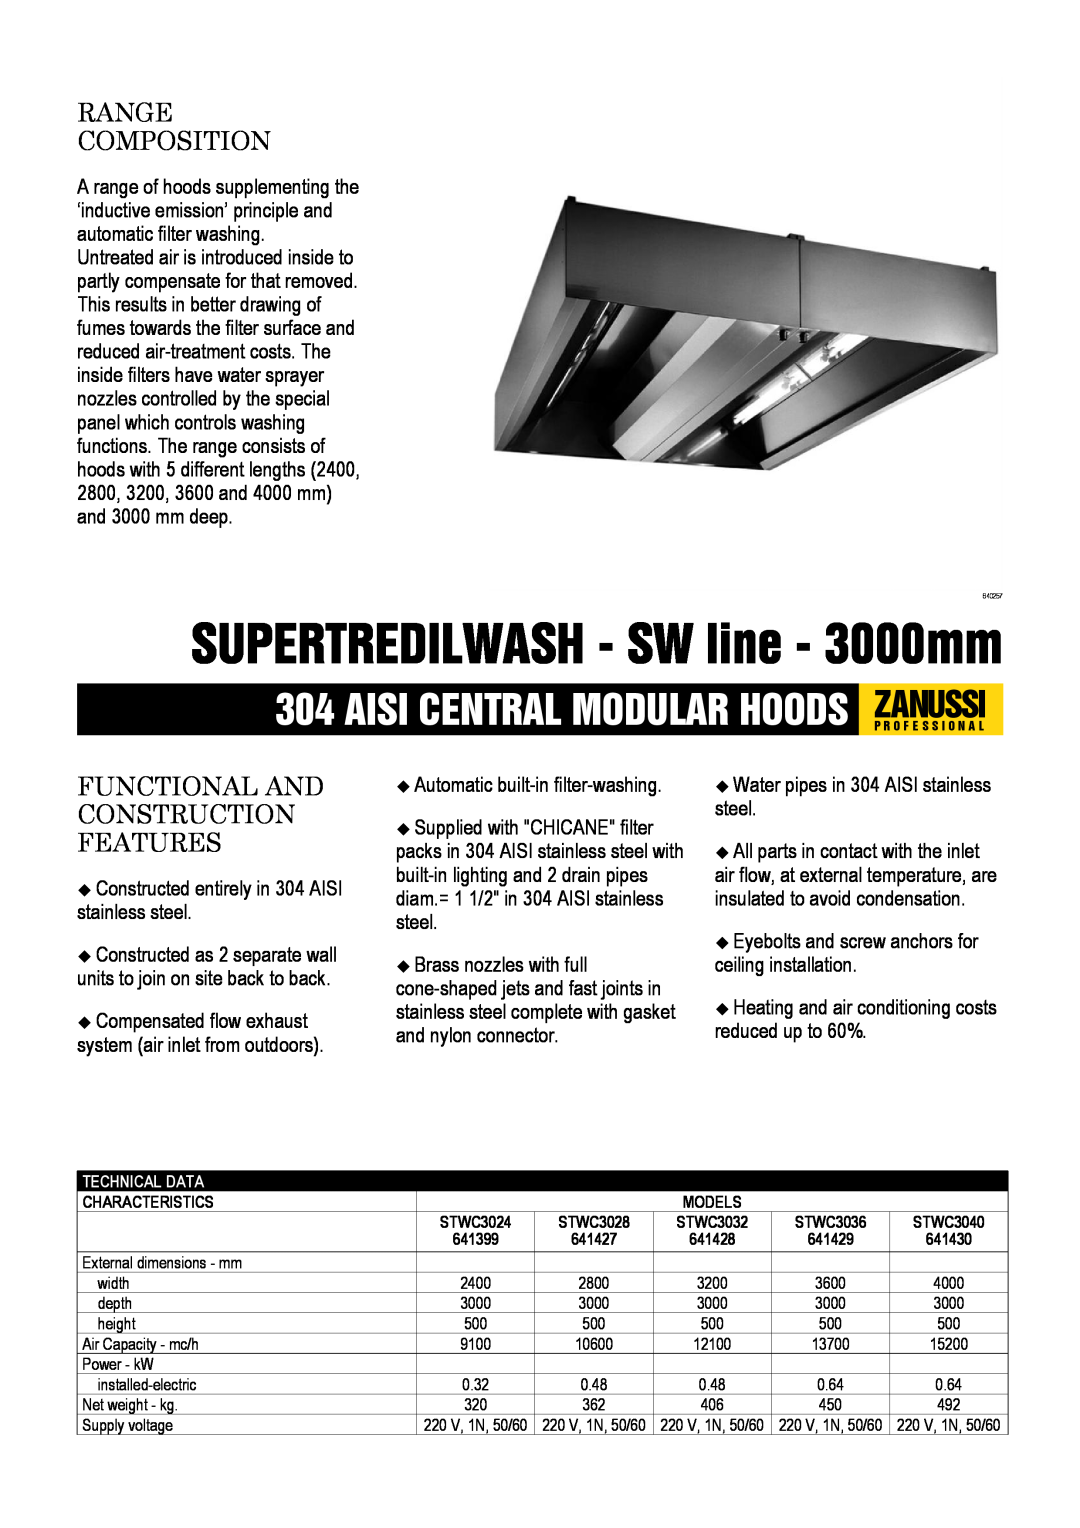 Zanussi STWC3000 dimensions SUPERTREDILWASH - SW line - 3000mm, Range Composition, Functional And Construction Features 